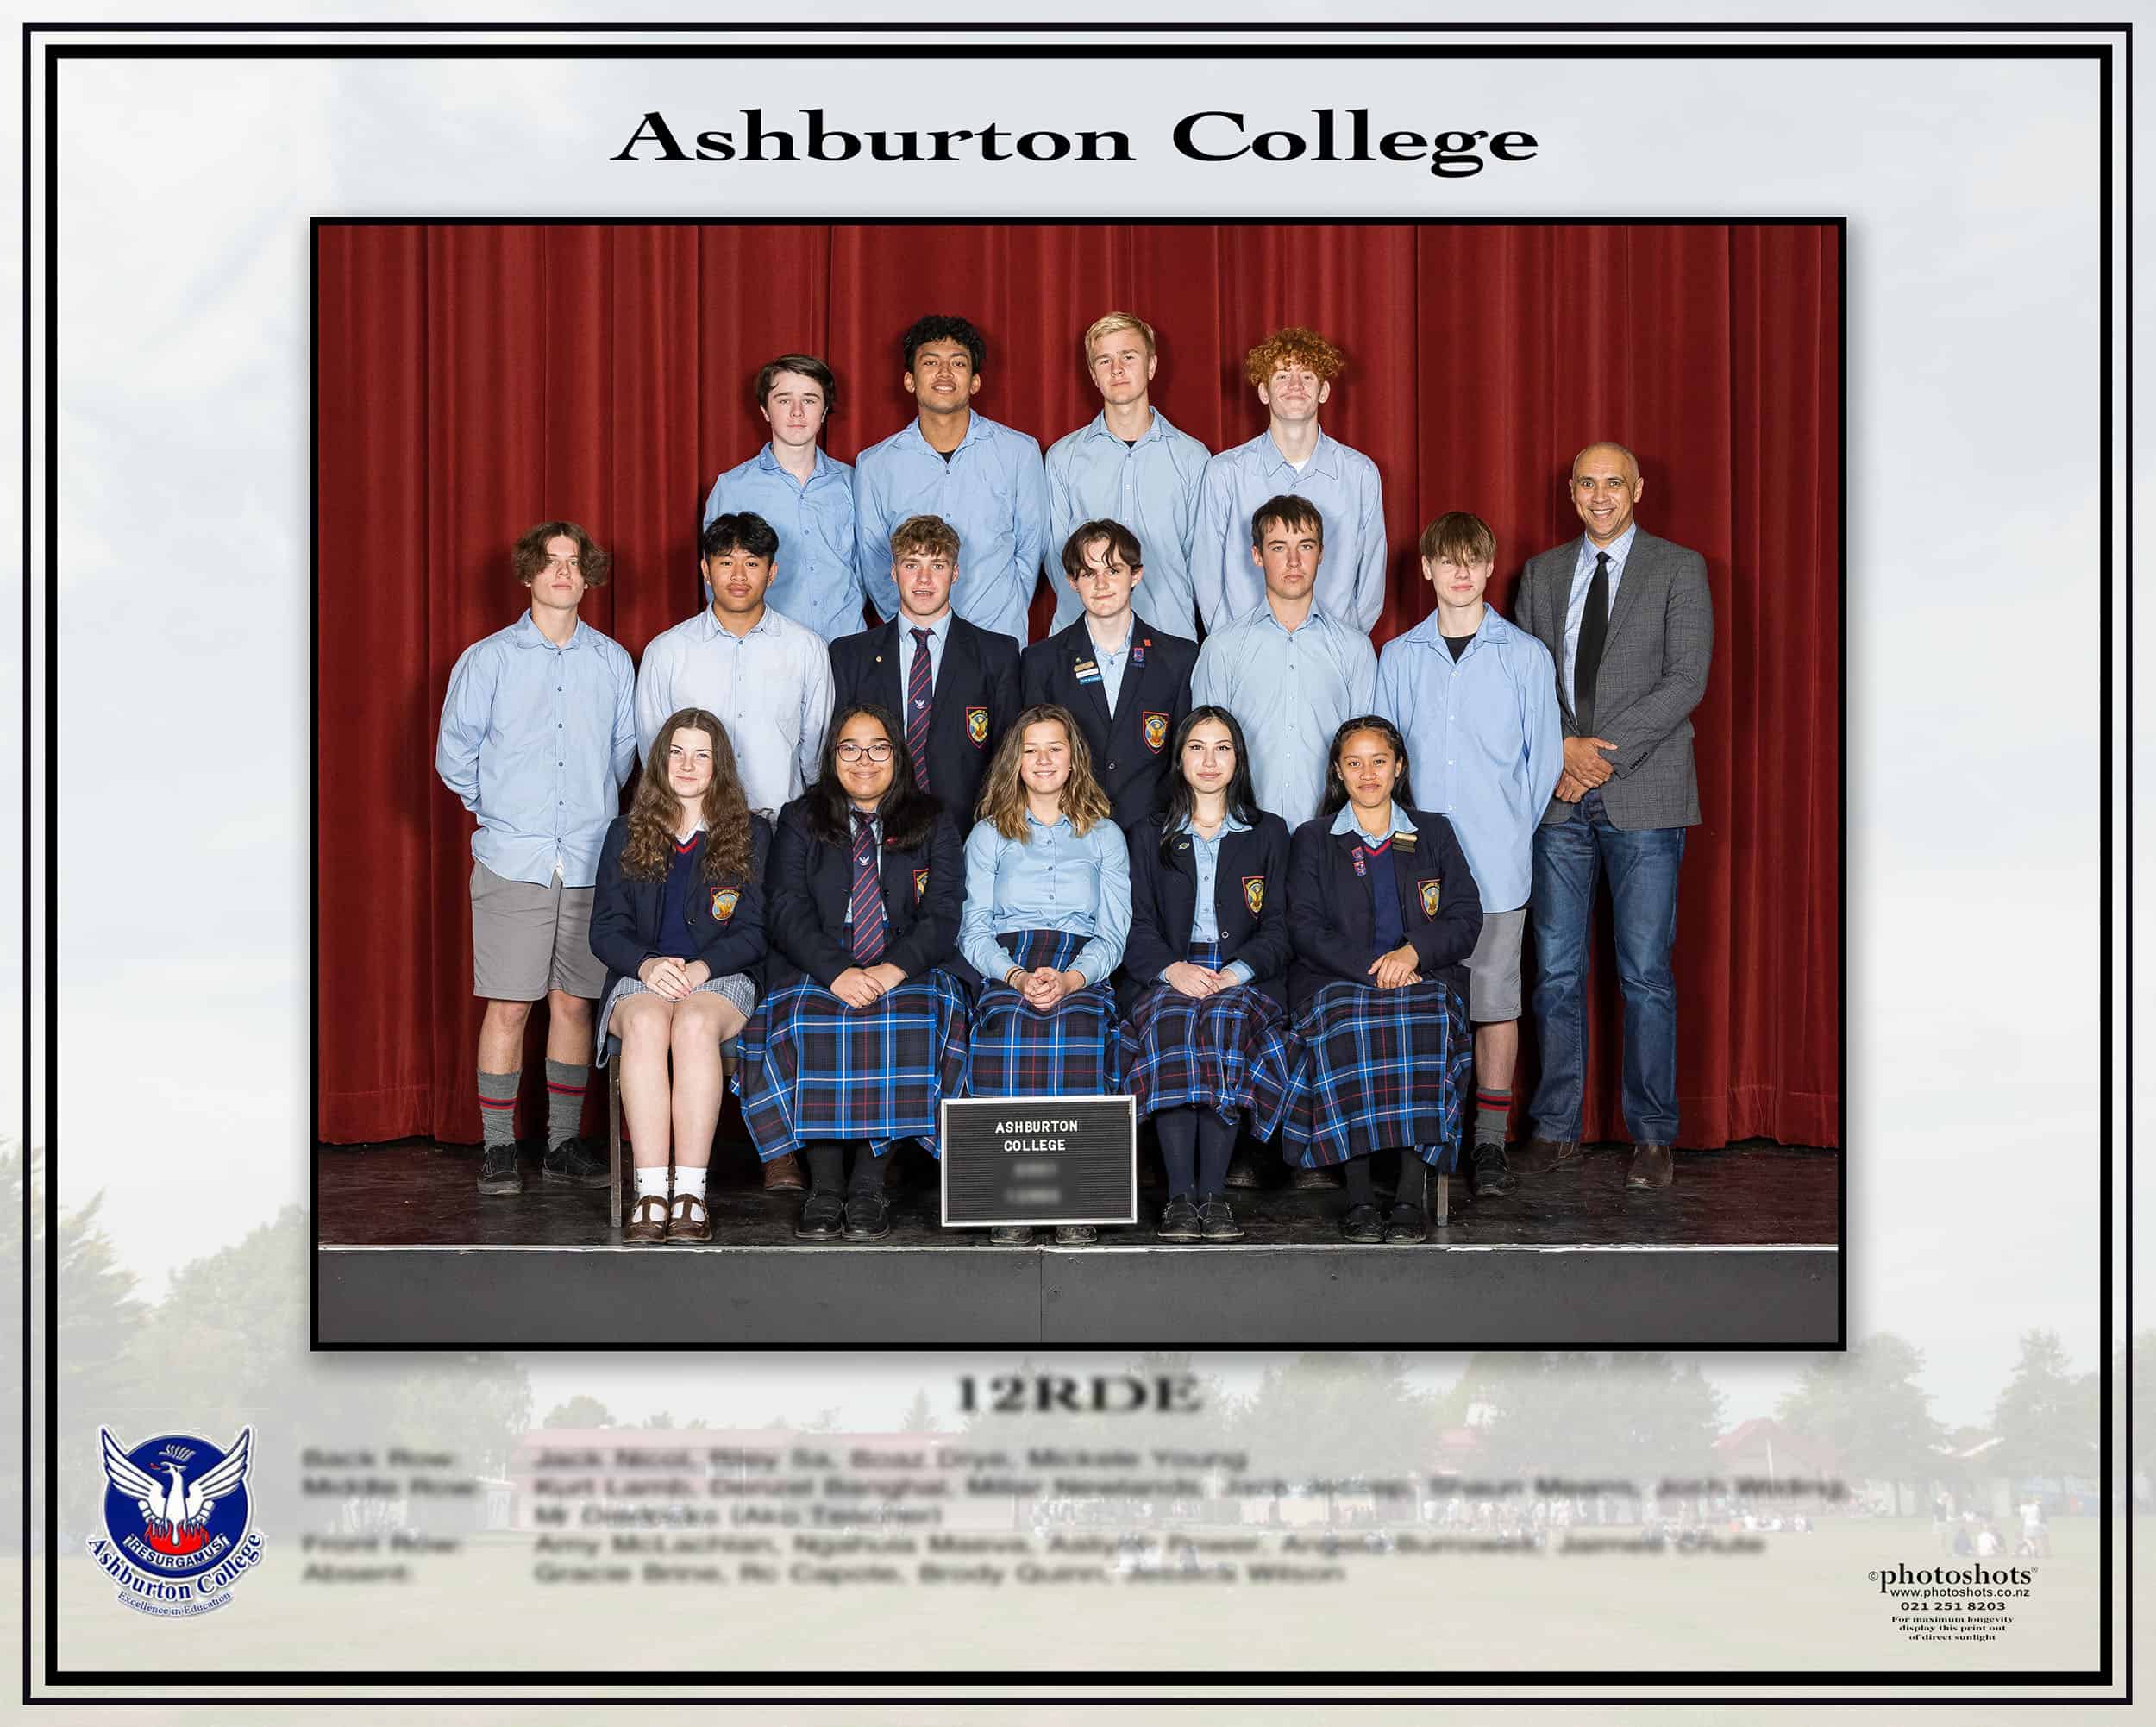 Class photo from Ashburton College laid out in an 8x10in template, with logo and names.